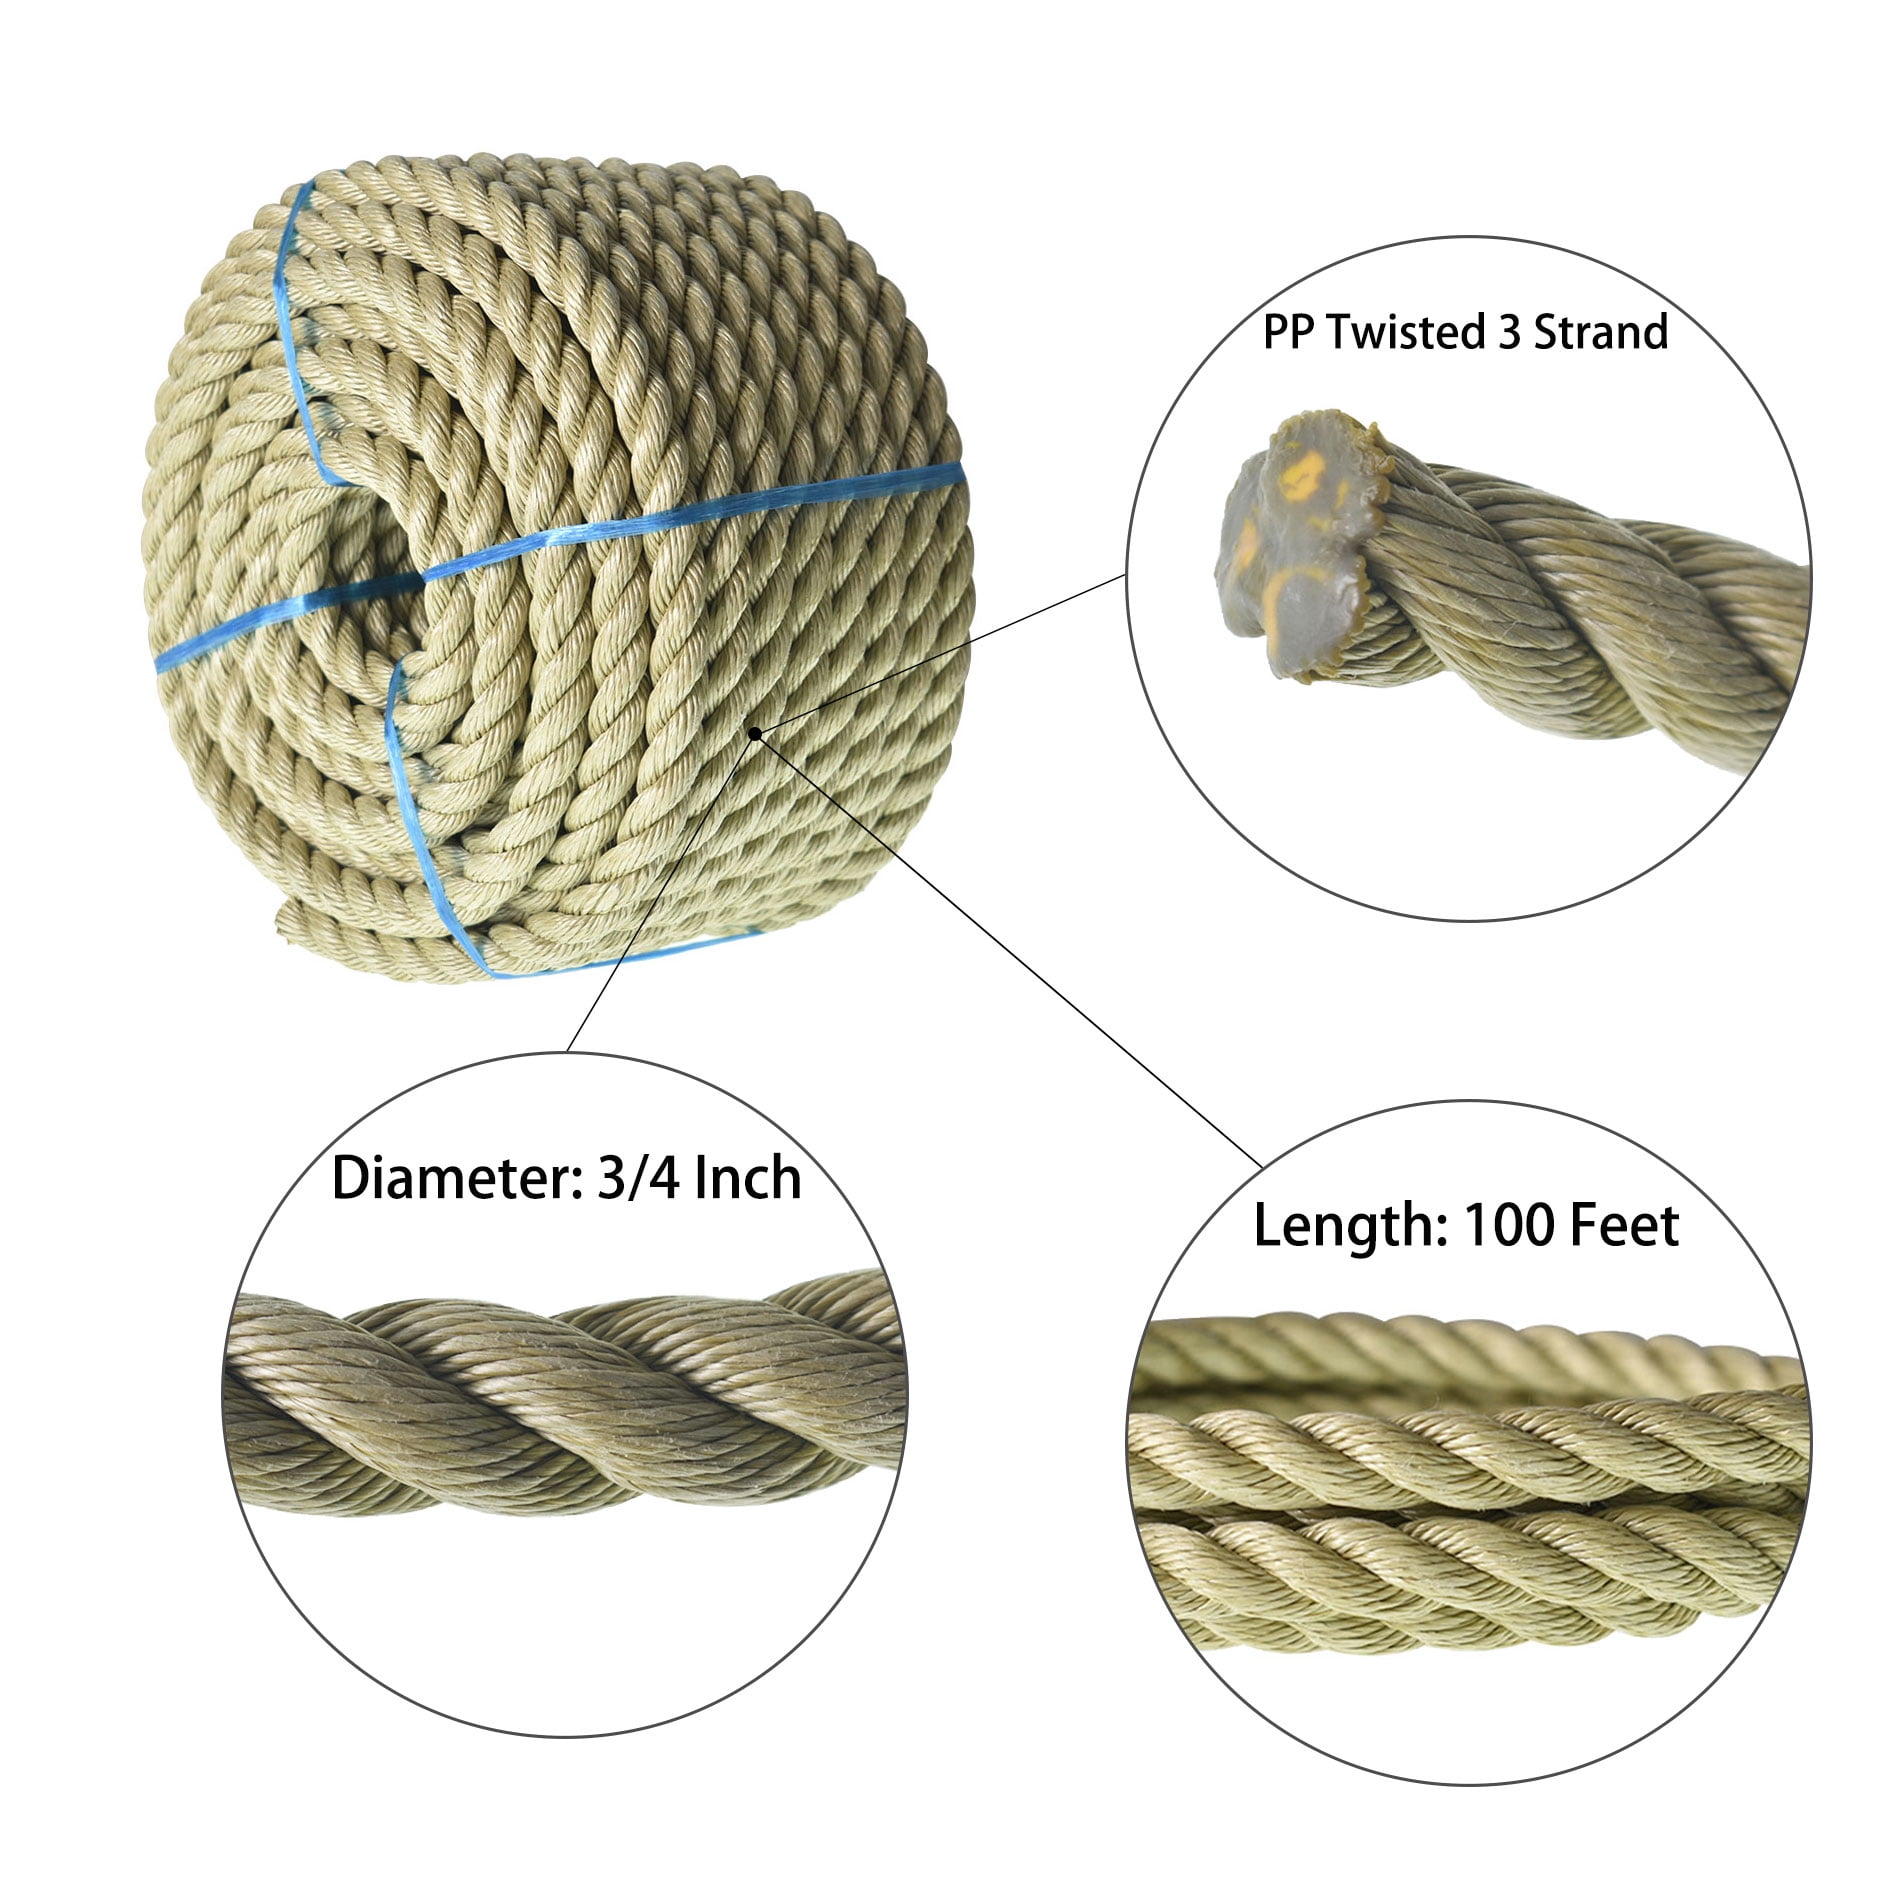 Polypropylene Rope 50Ft – 1/4 Inch Twisted Nautical Rope – Oil